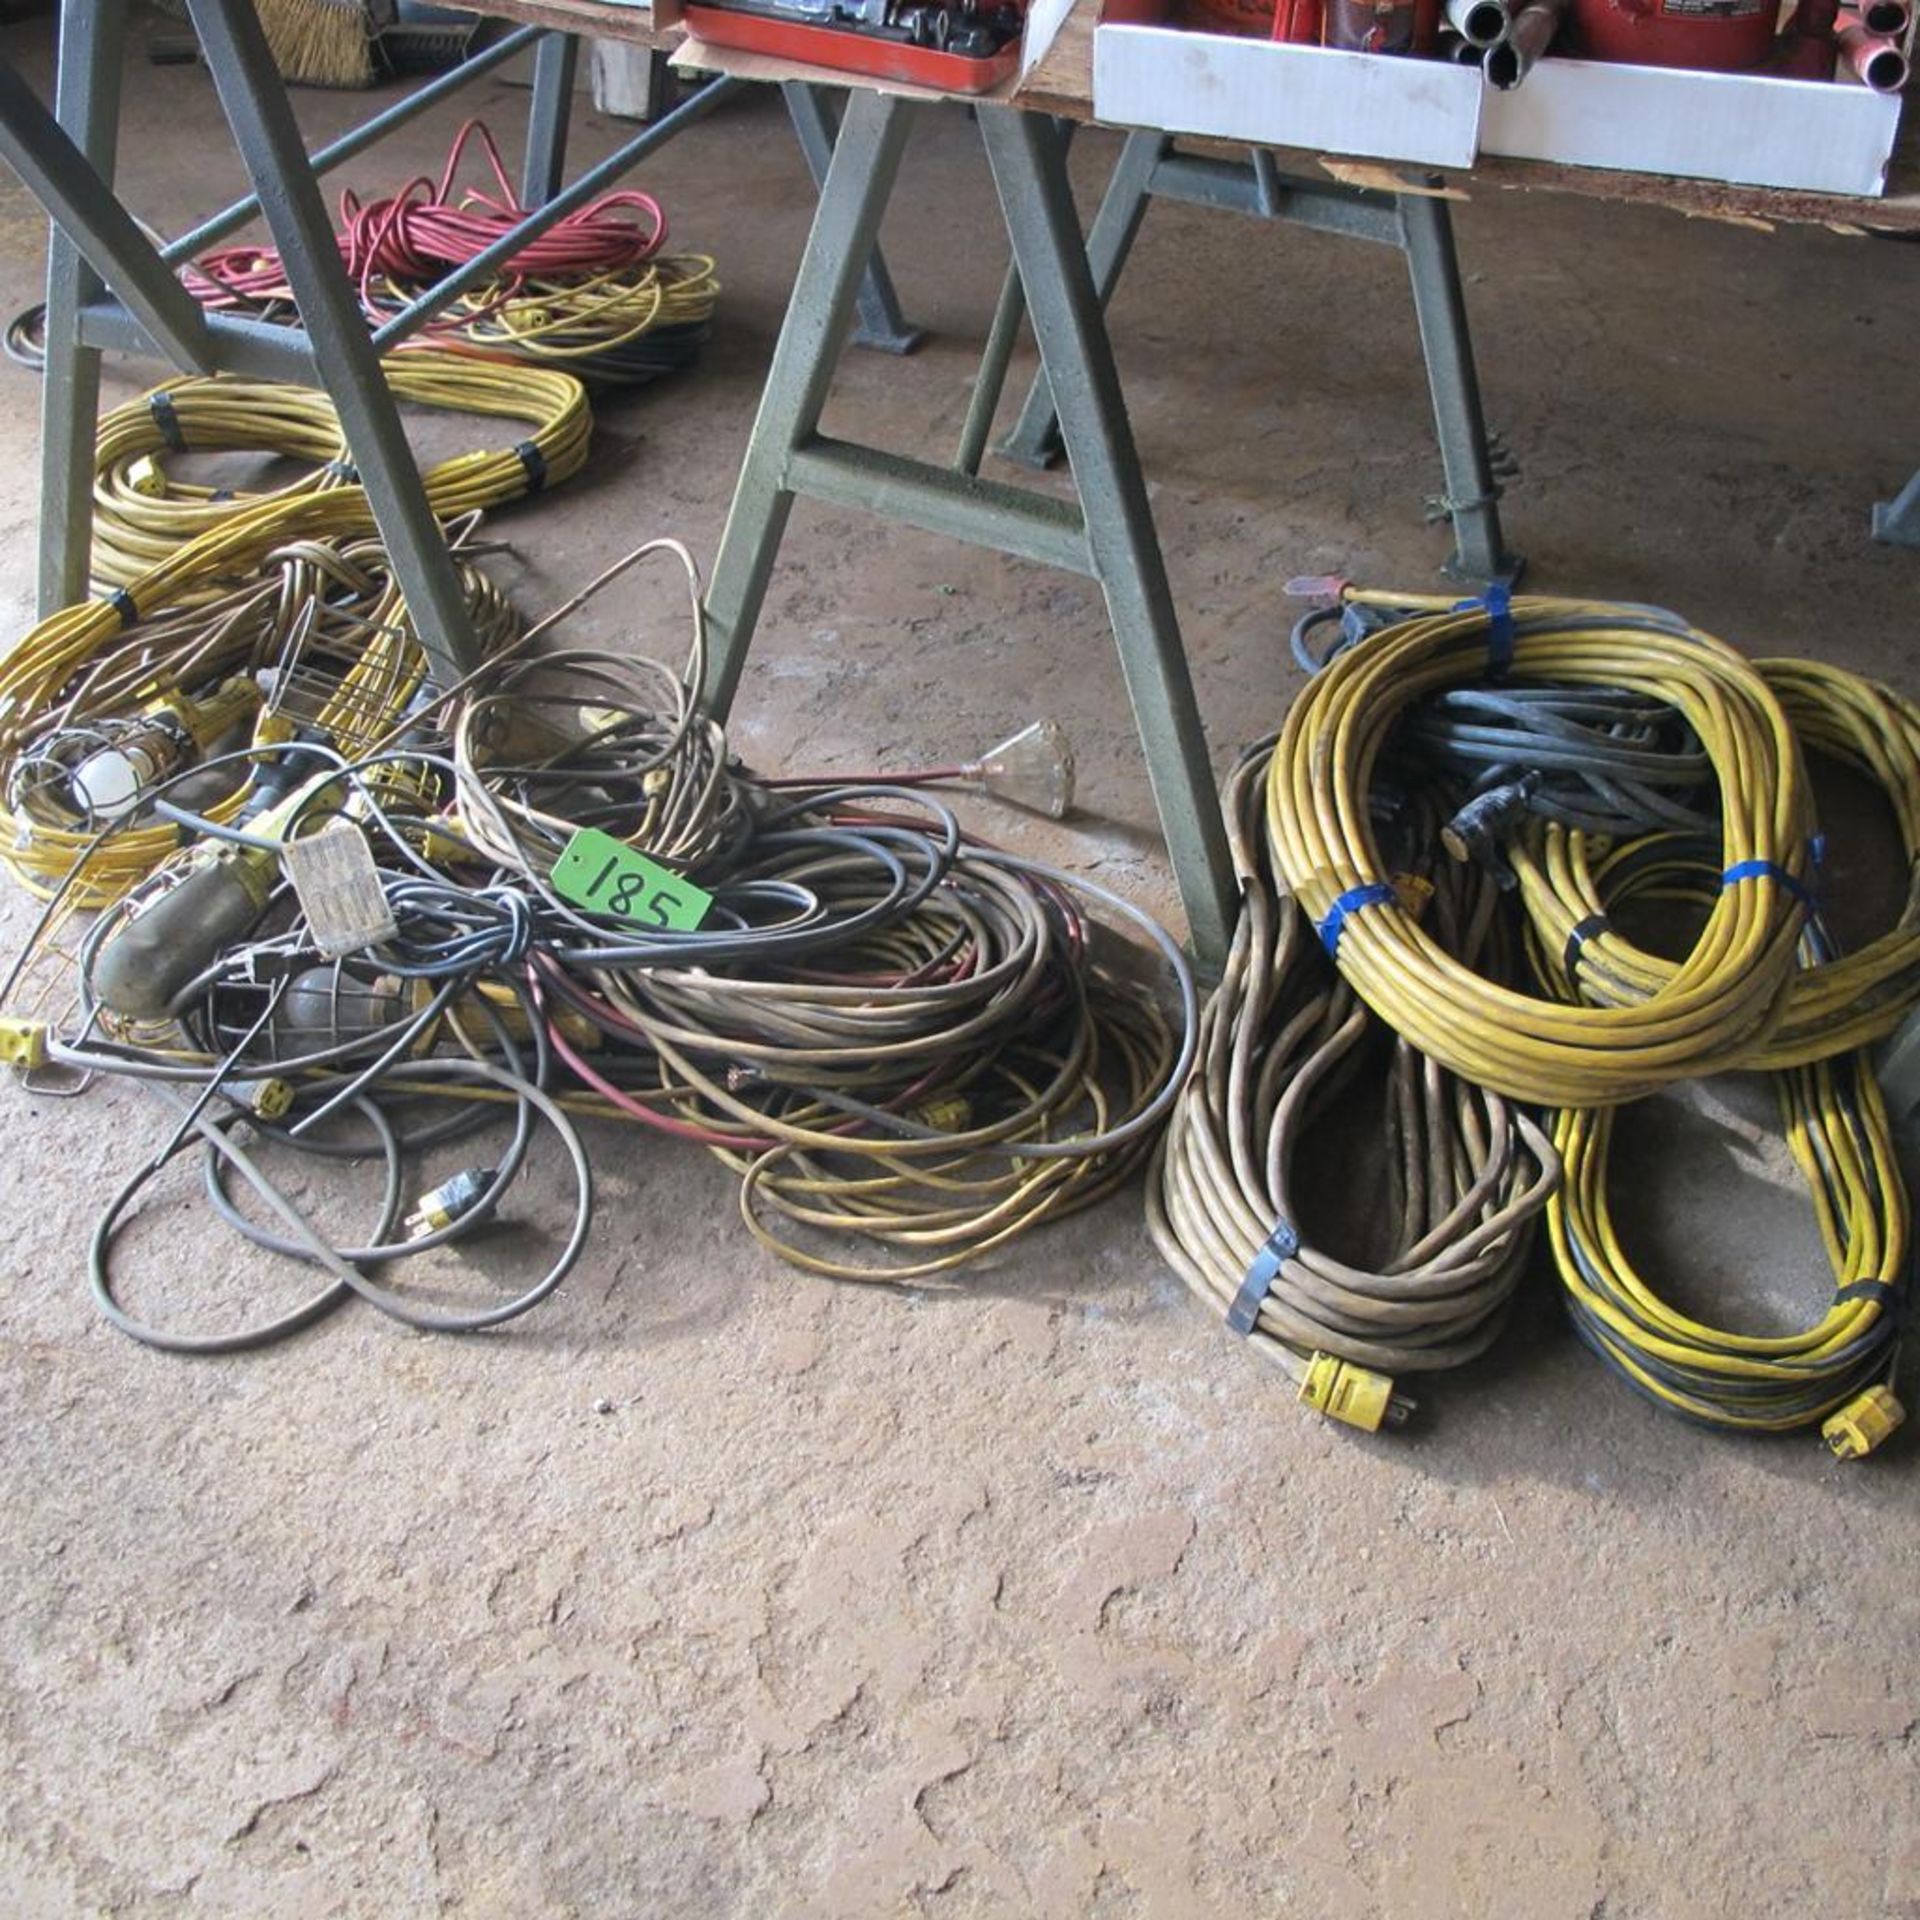 LOT OF EXTENSION CORDS AND LAMPS (IN MAIN BLDG)